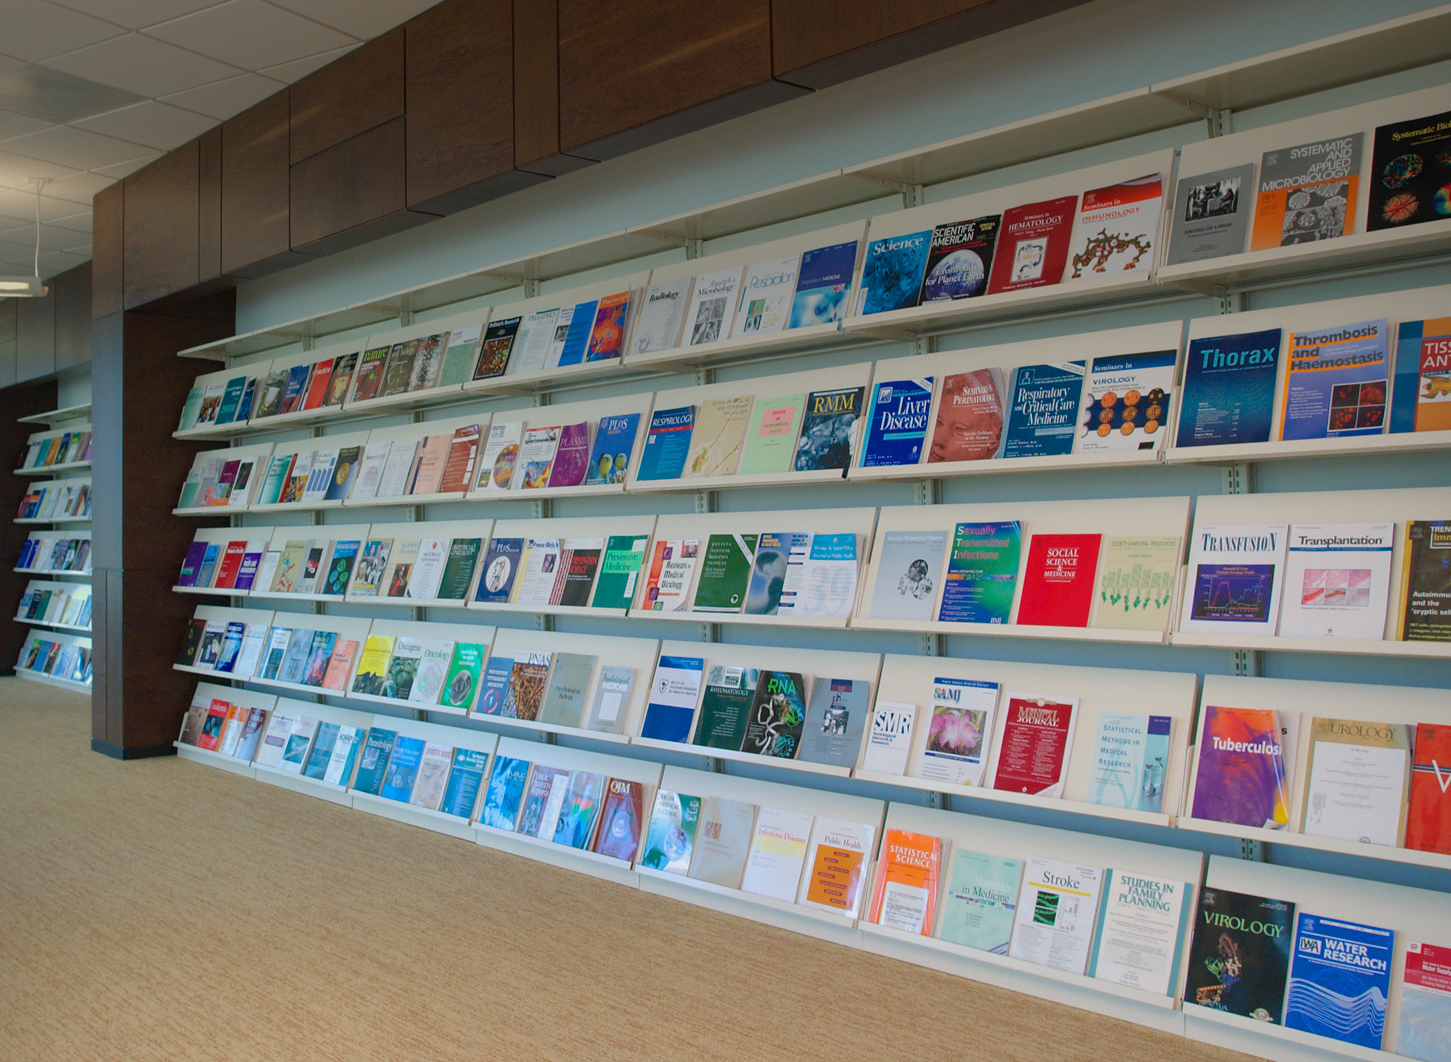 Shelves in a library showing journals where researchers publish a scientific paper.